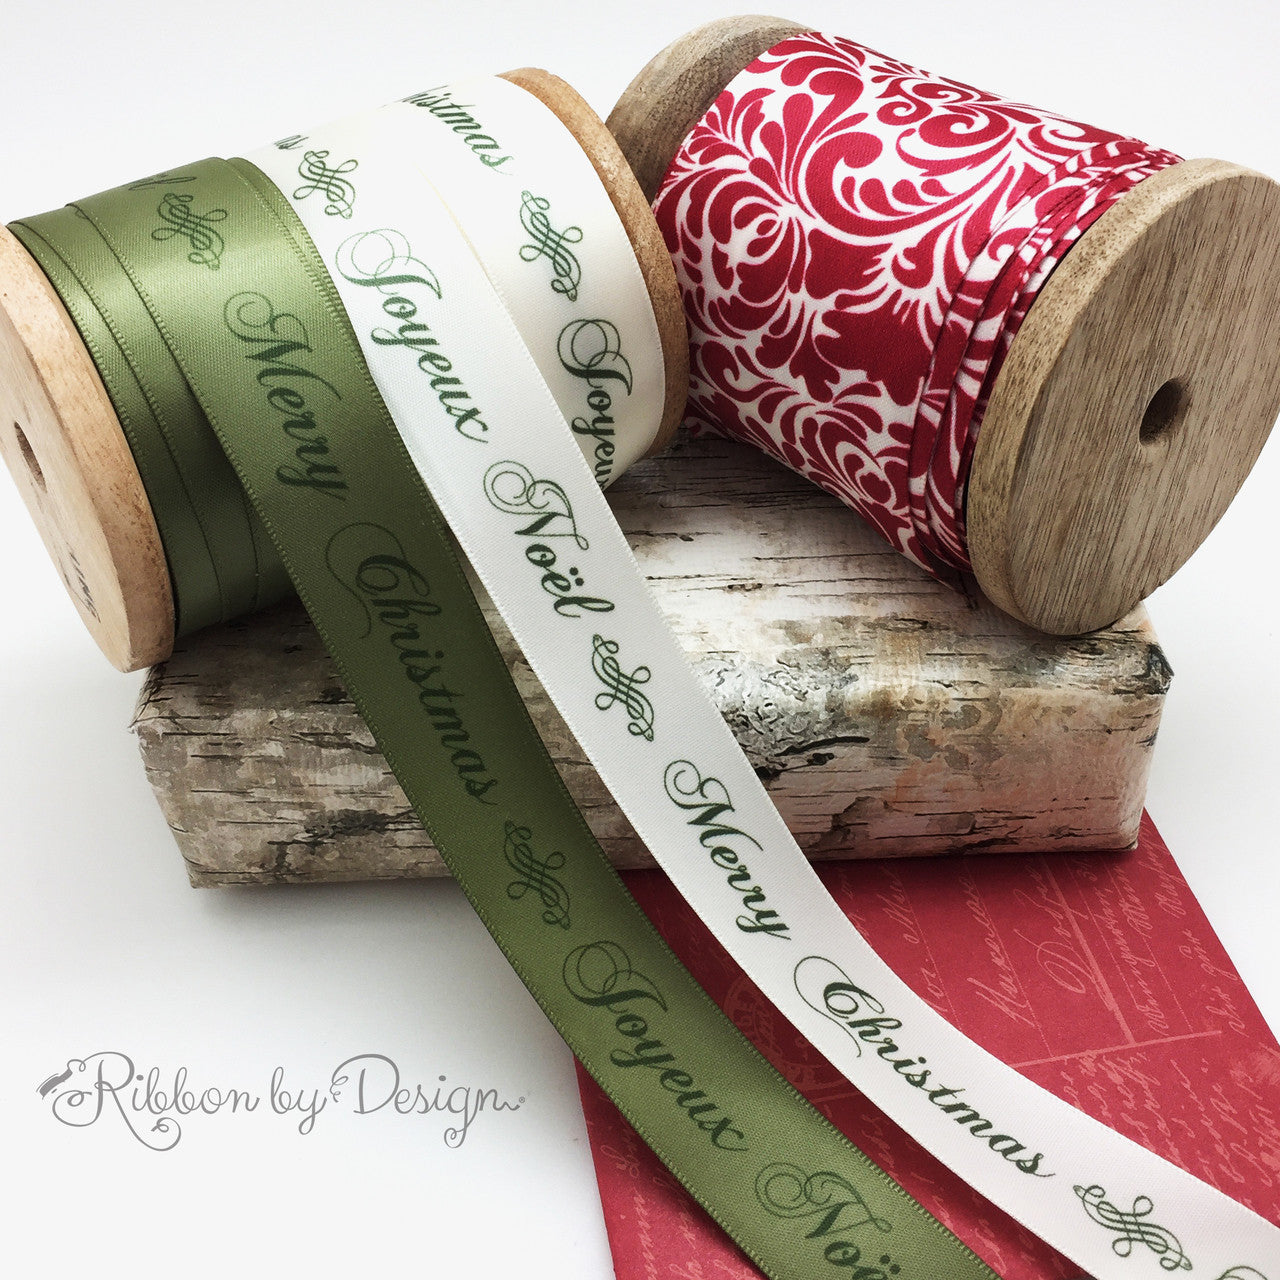 Soft sage and antique white make for a very romantic Holiday themed gift. Wrap a special gift for your sweetheart with these ribbons this year!